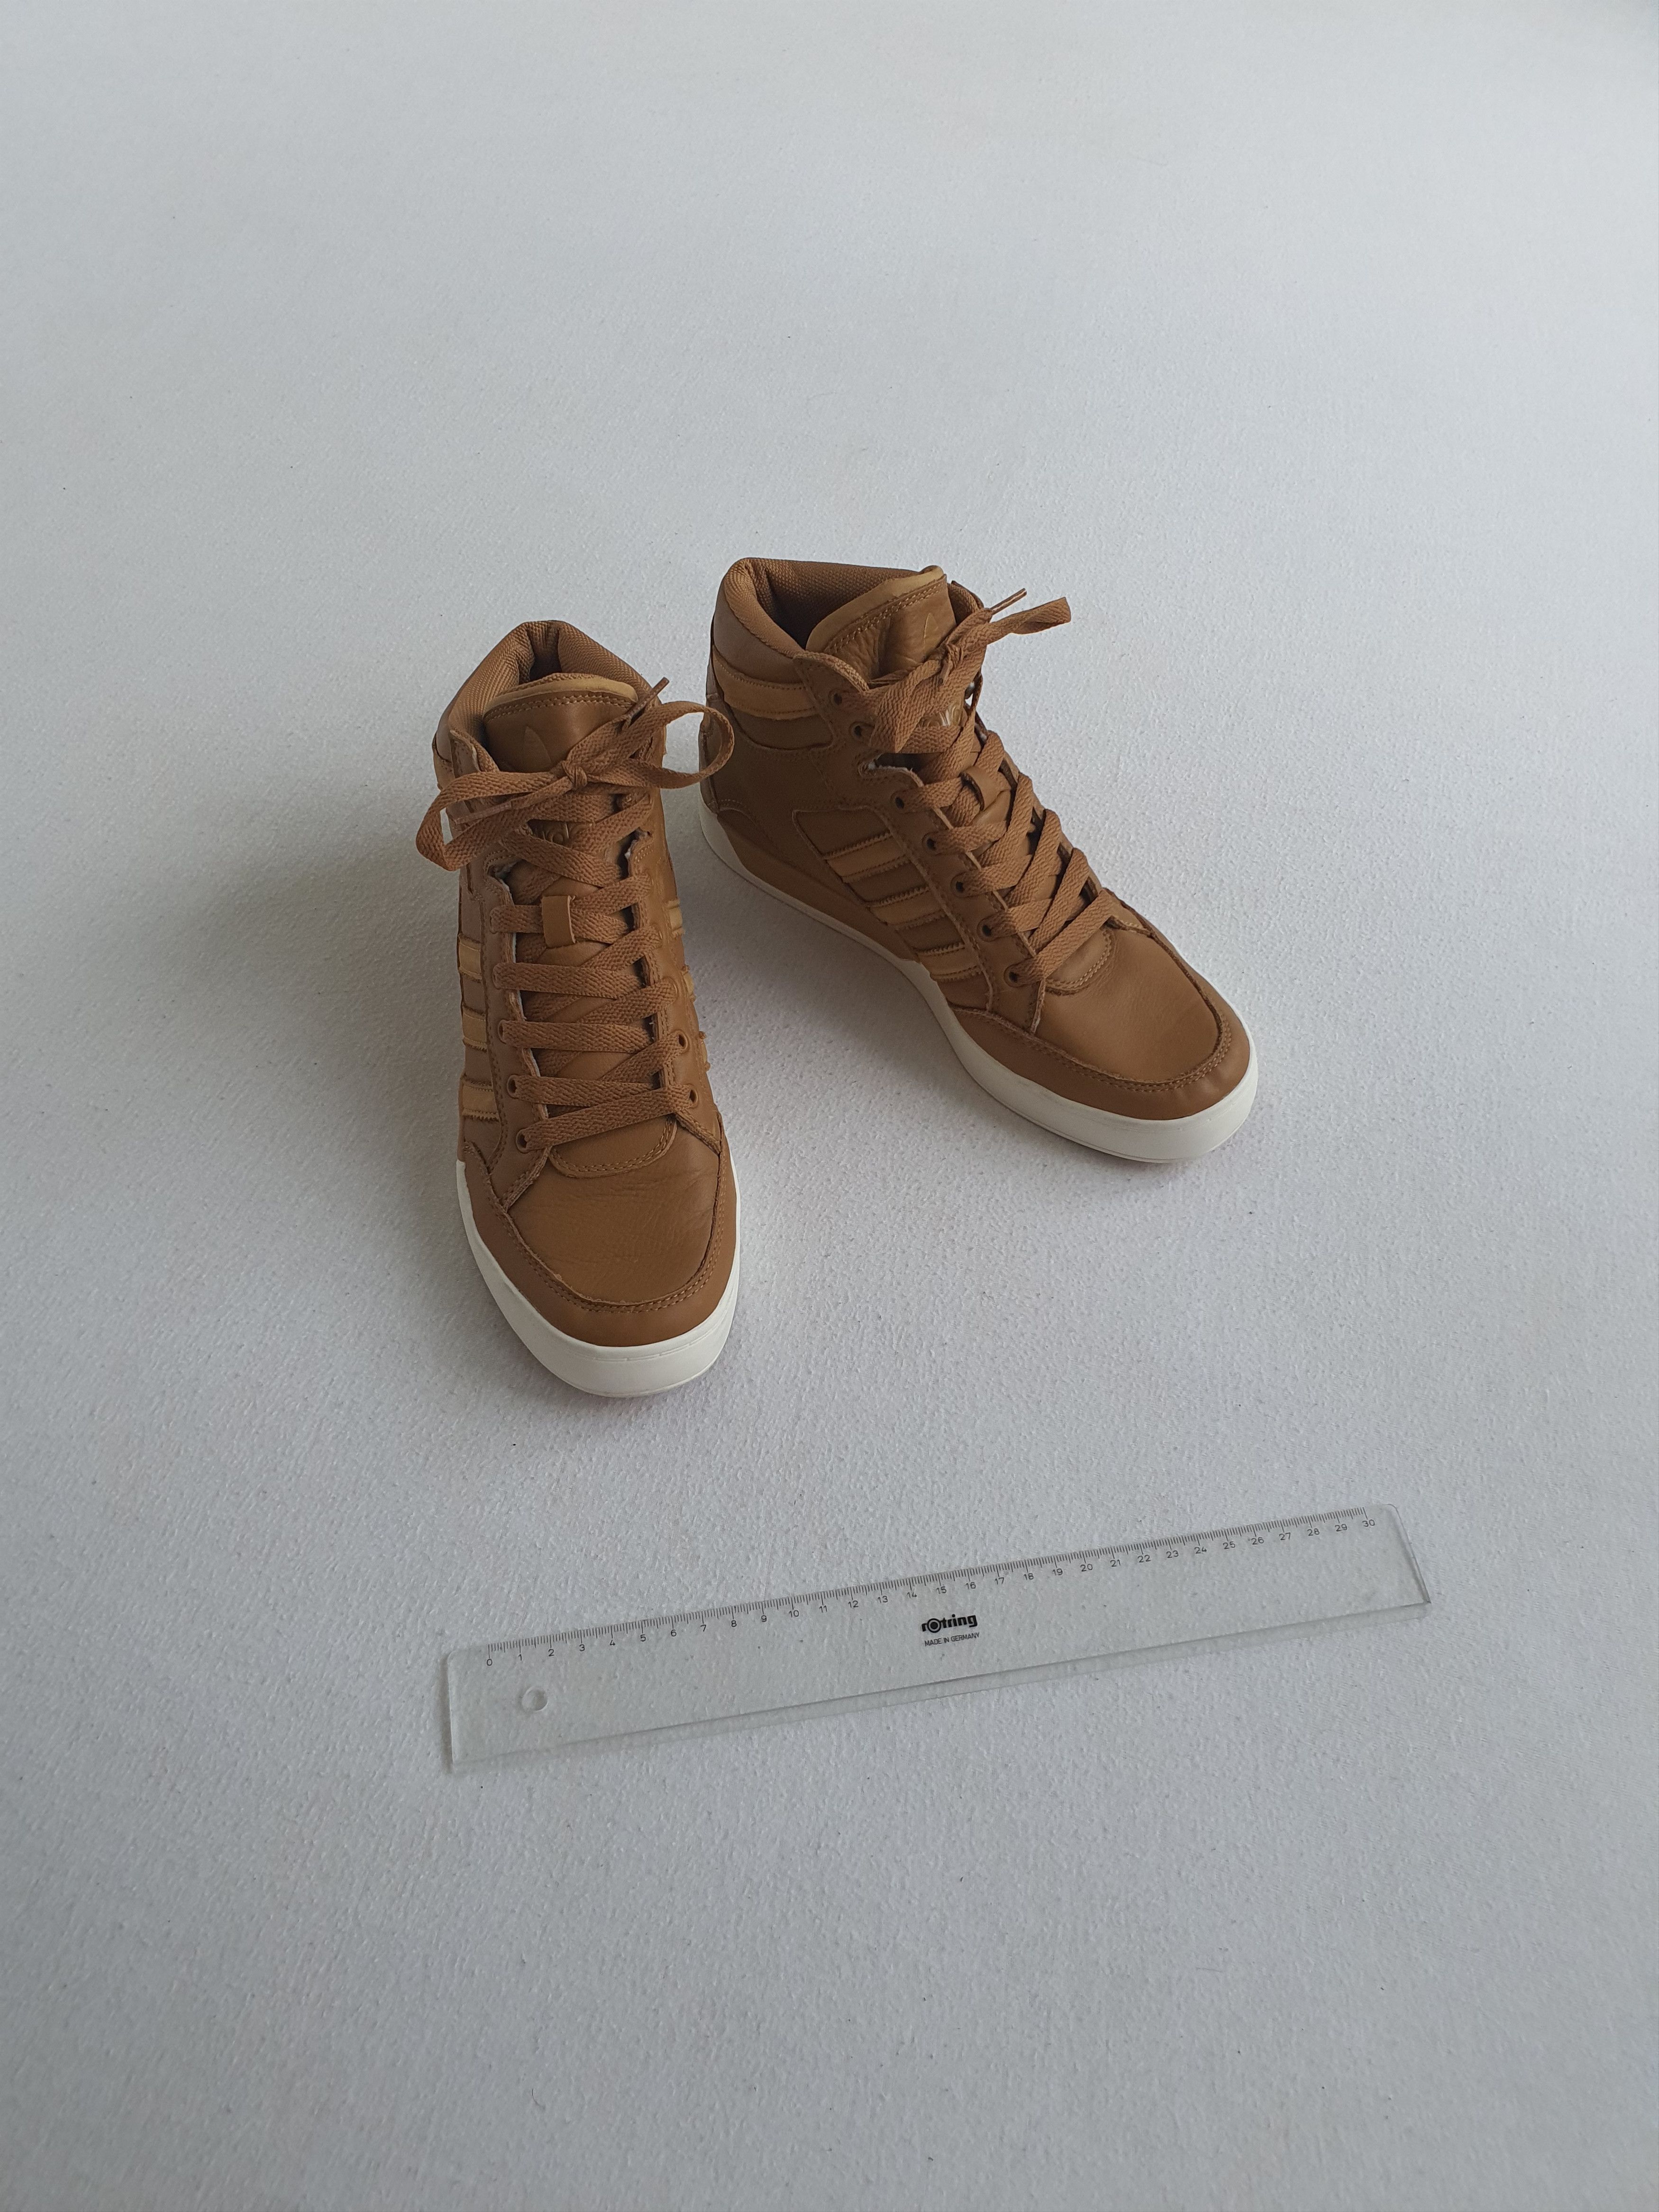 Adidas ''HARD COURT HI'' (BB6781) High Top Sneakers Size US 9.5 / EU 42-43 - 1 Preview